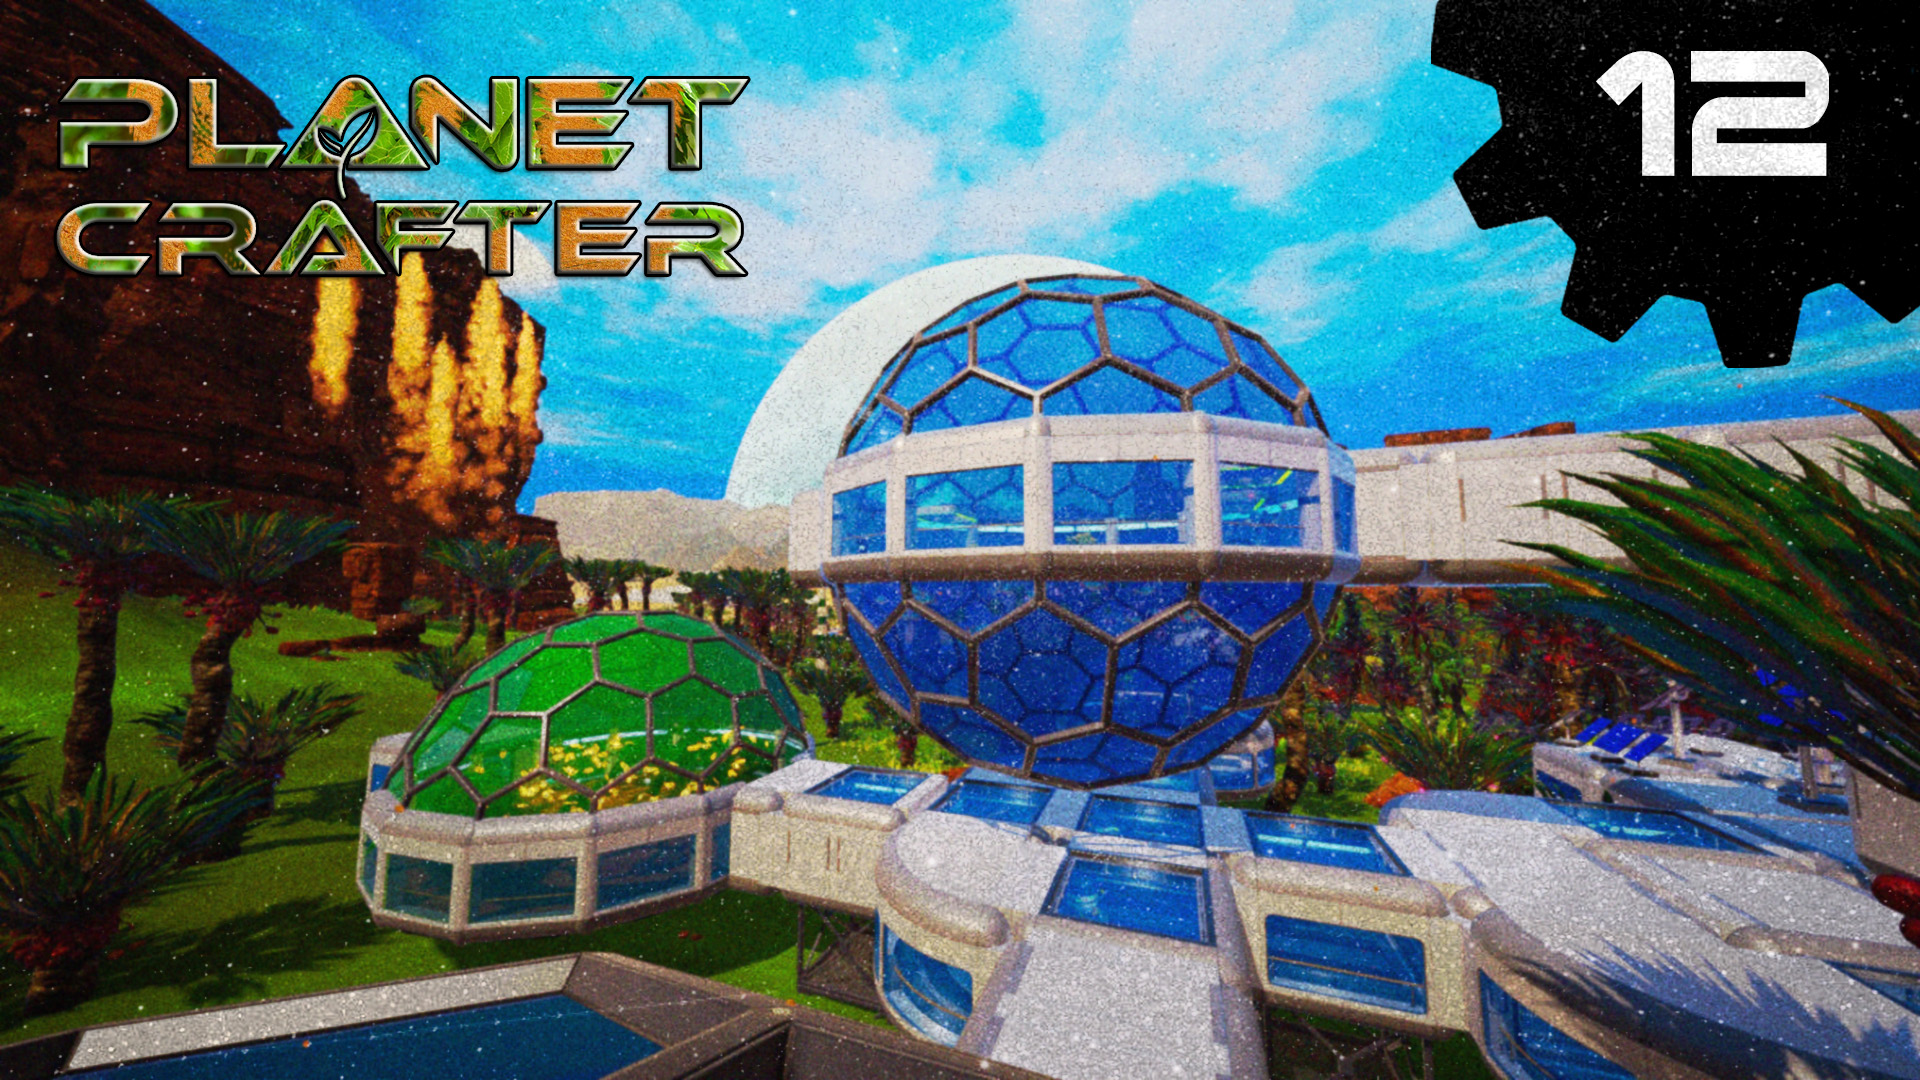 The planet crafter читы. The Planet Crafter. Planet Crafter карта. Приложения Энт пленет. The Planet Crafter третьи руины на карте.